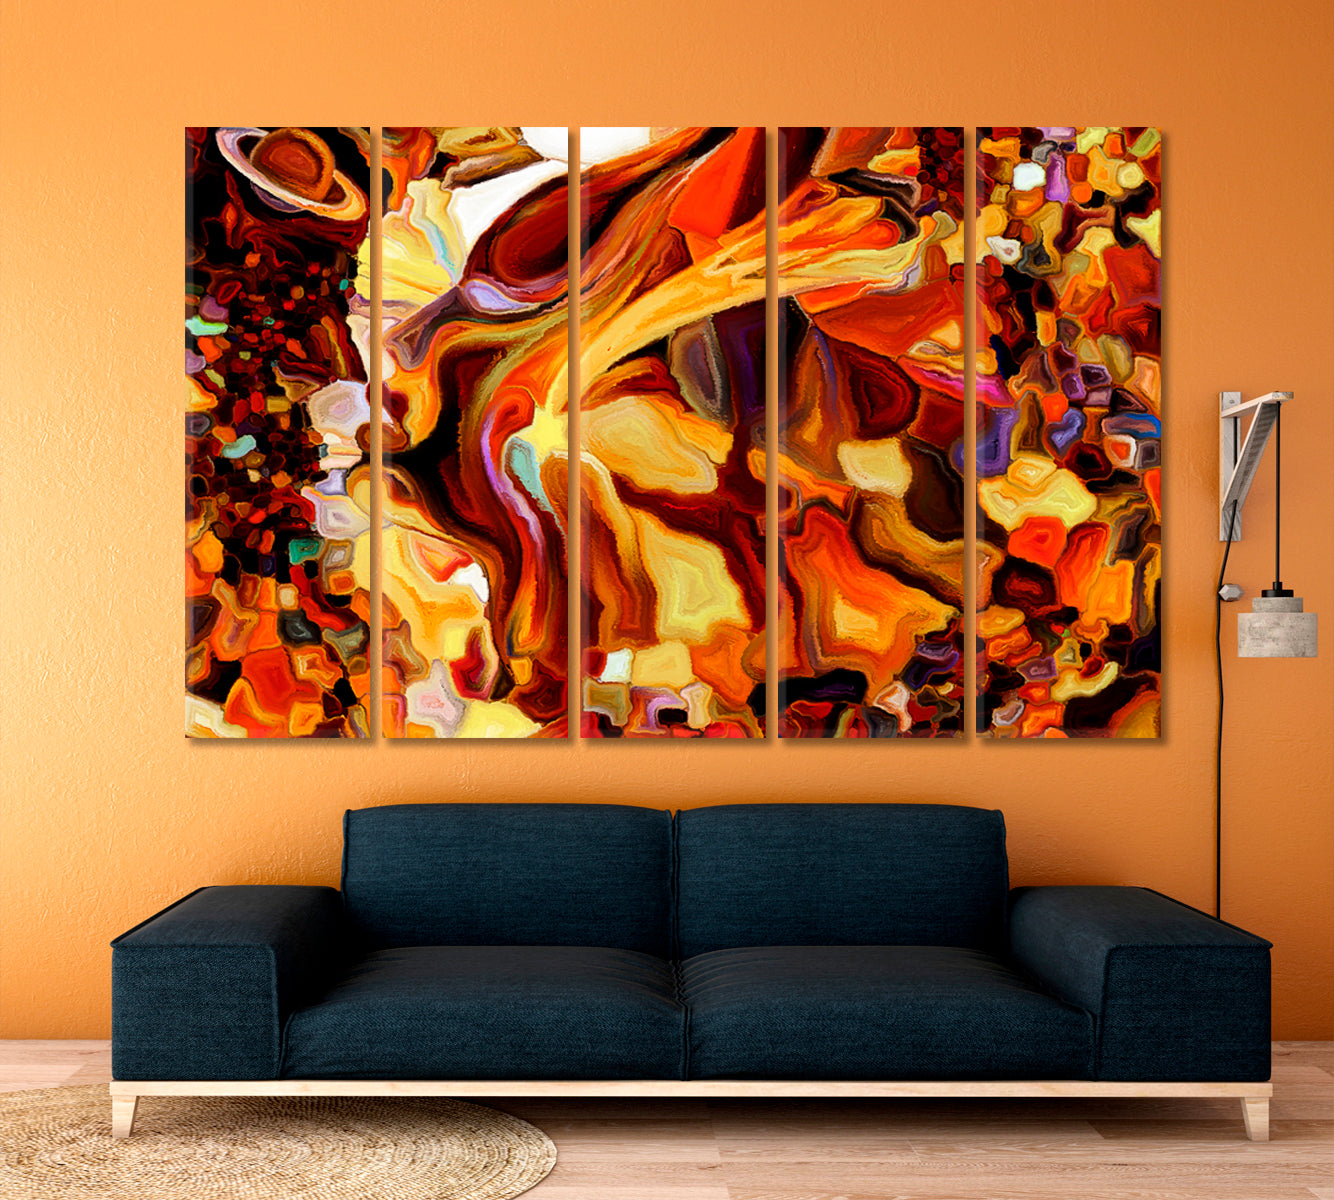 World Of Forms, Human Profiles Symbols And Color Patterns Abstract Art Print Artesty 5 panels 36" x 24" 